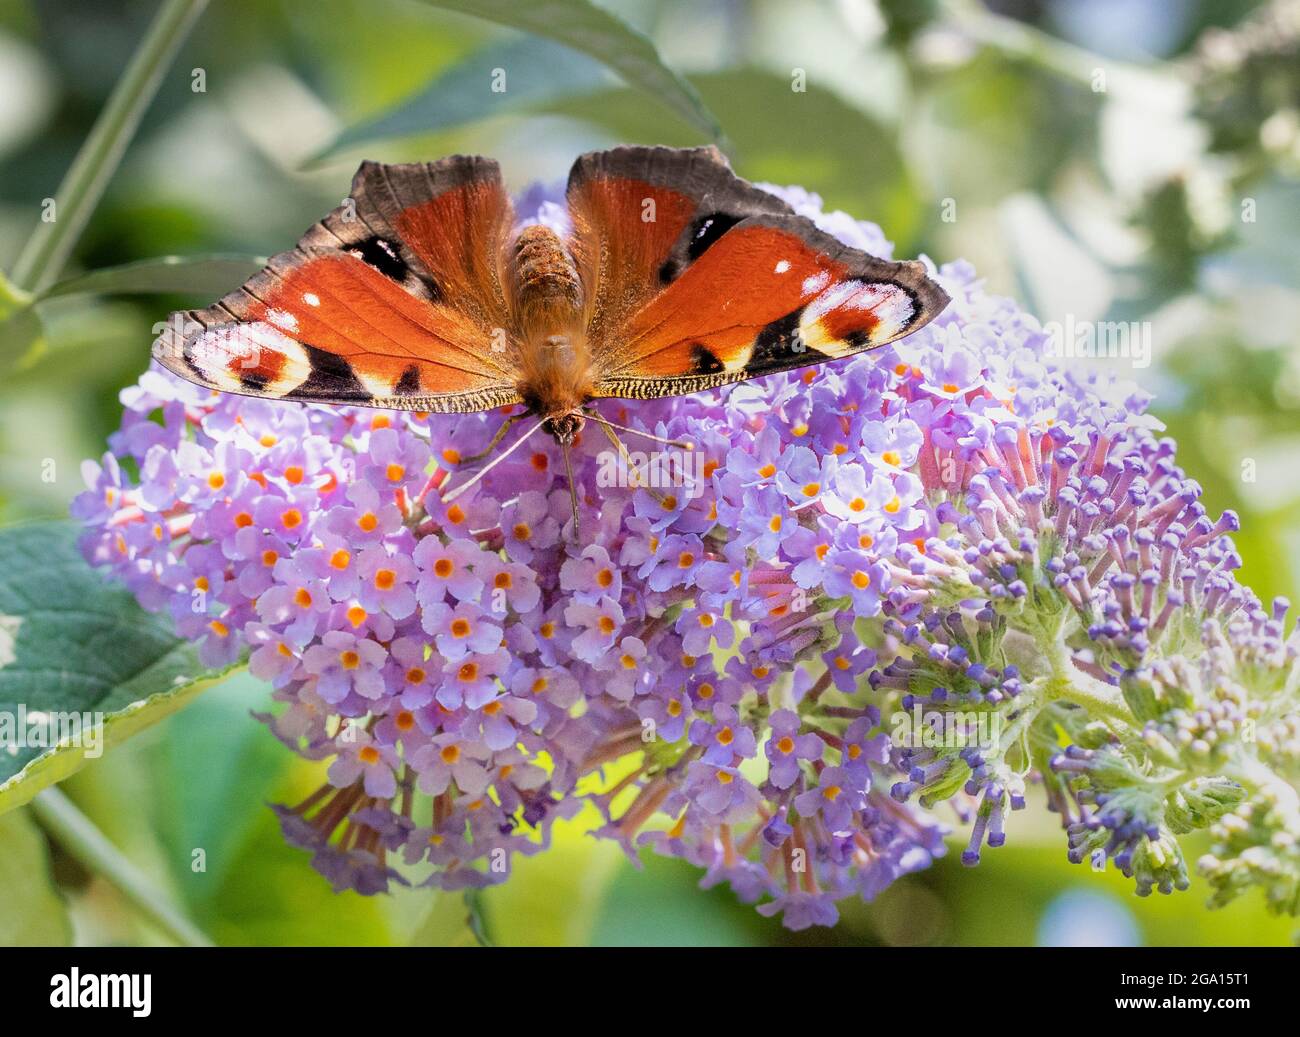 Peacock Butterfly, European Butterfly, Perched on a Buddleja bush in a British garden, summer 2021 Stock Photo